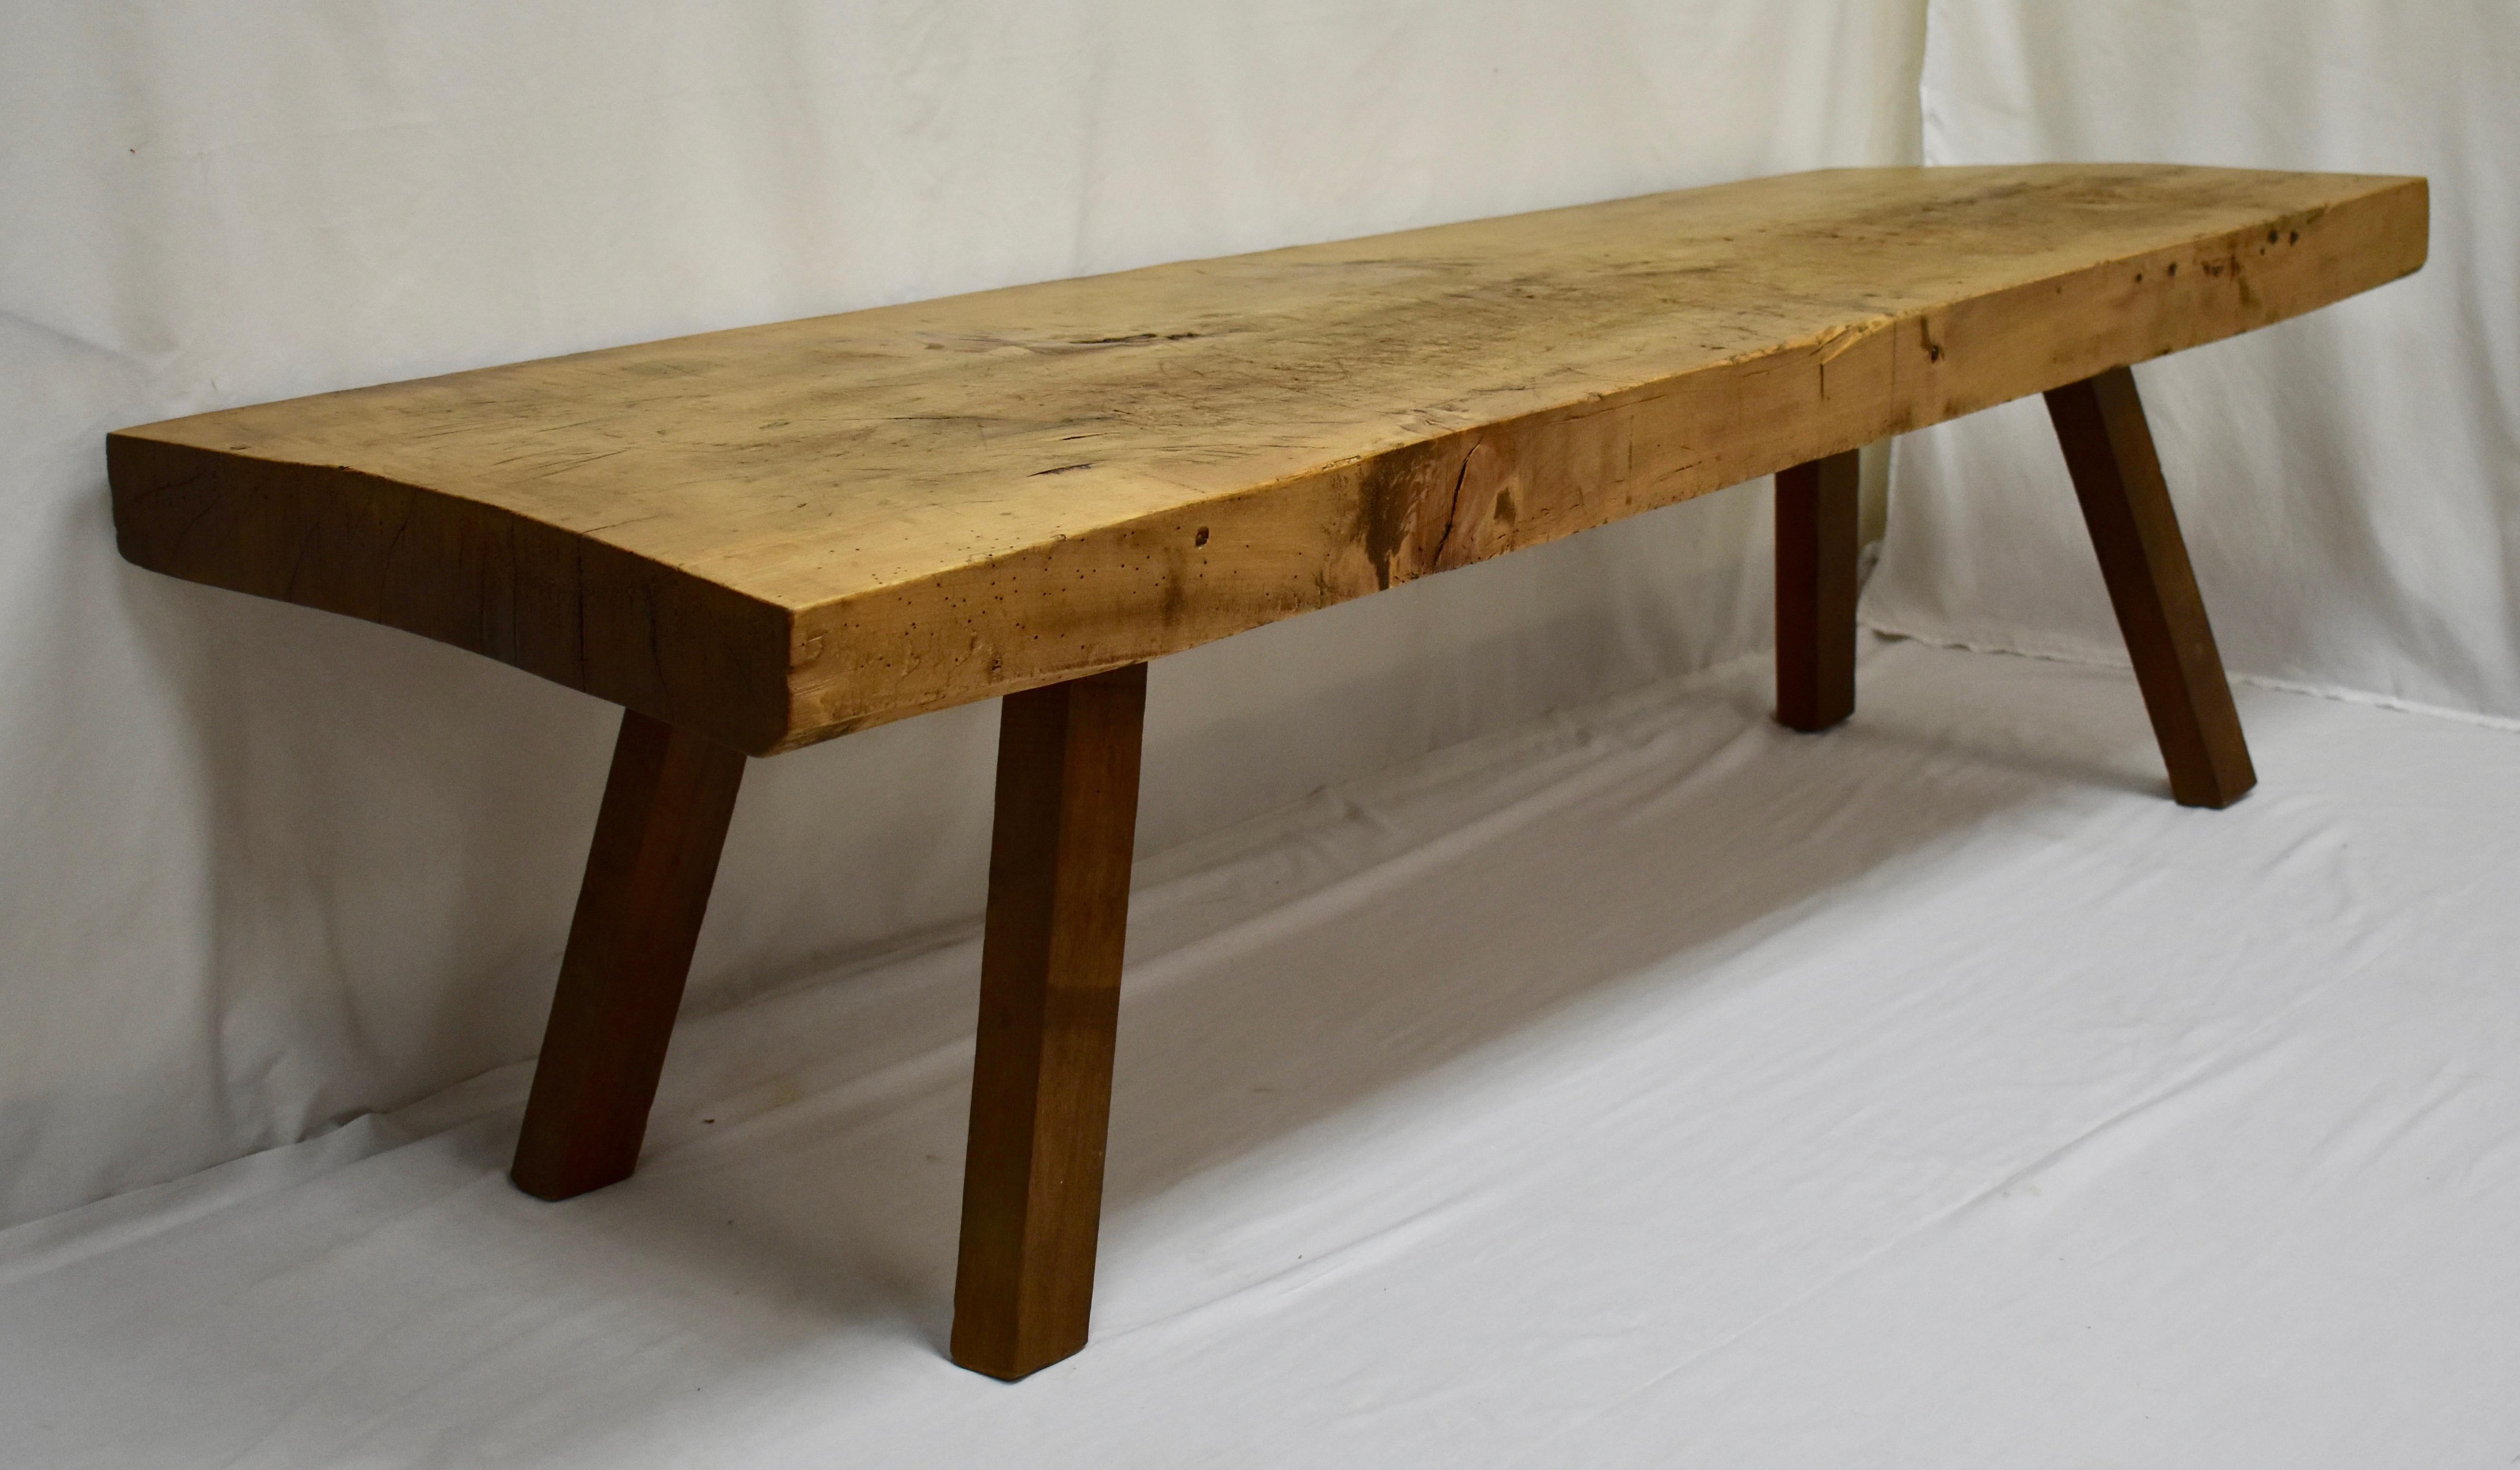 Hungarian Massive Oak Pig Bench Coffee Table